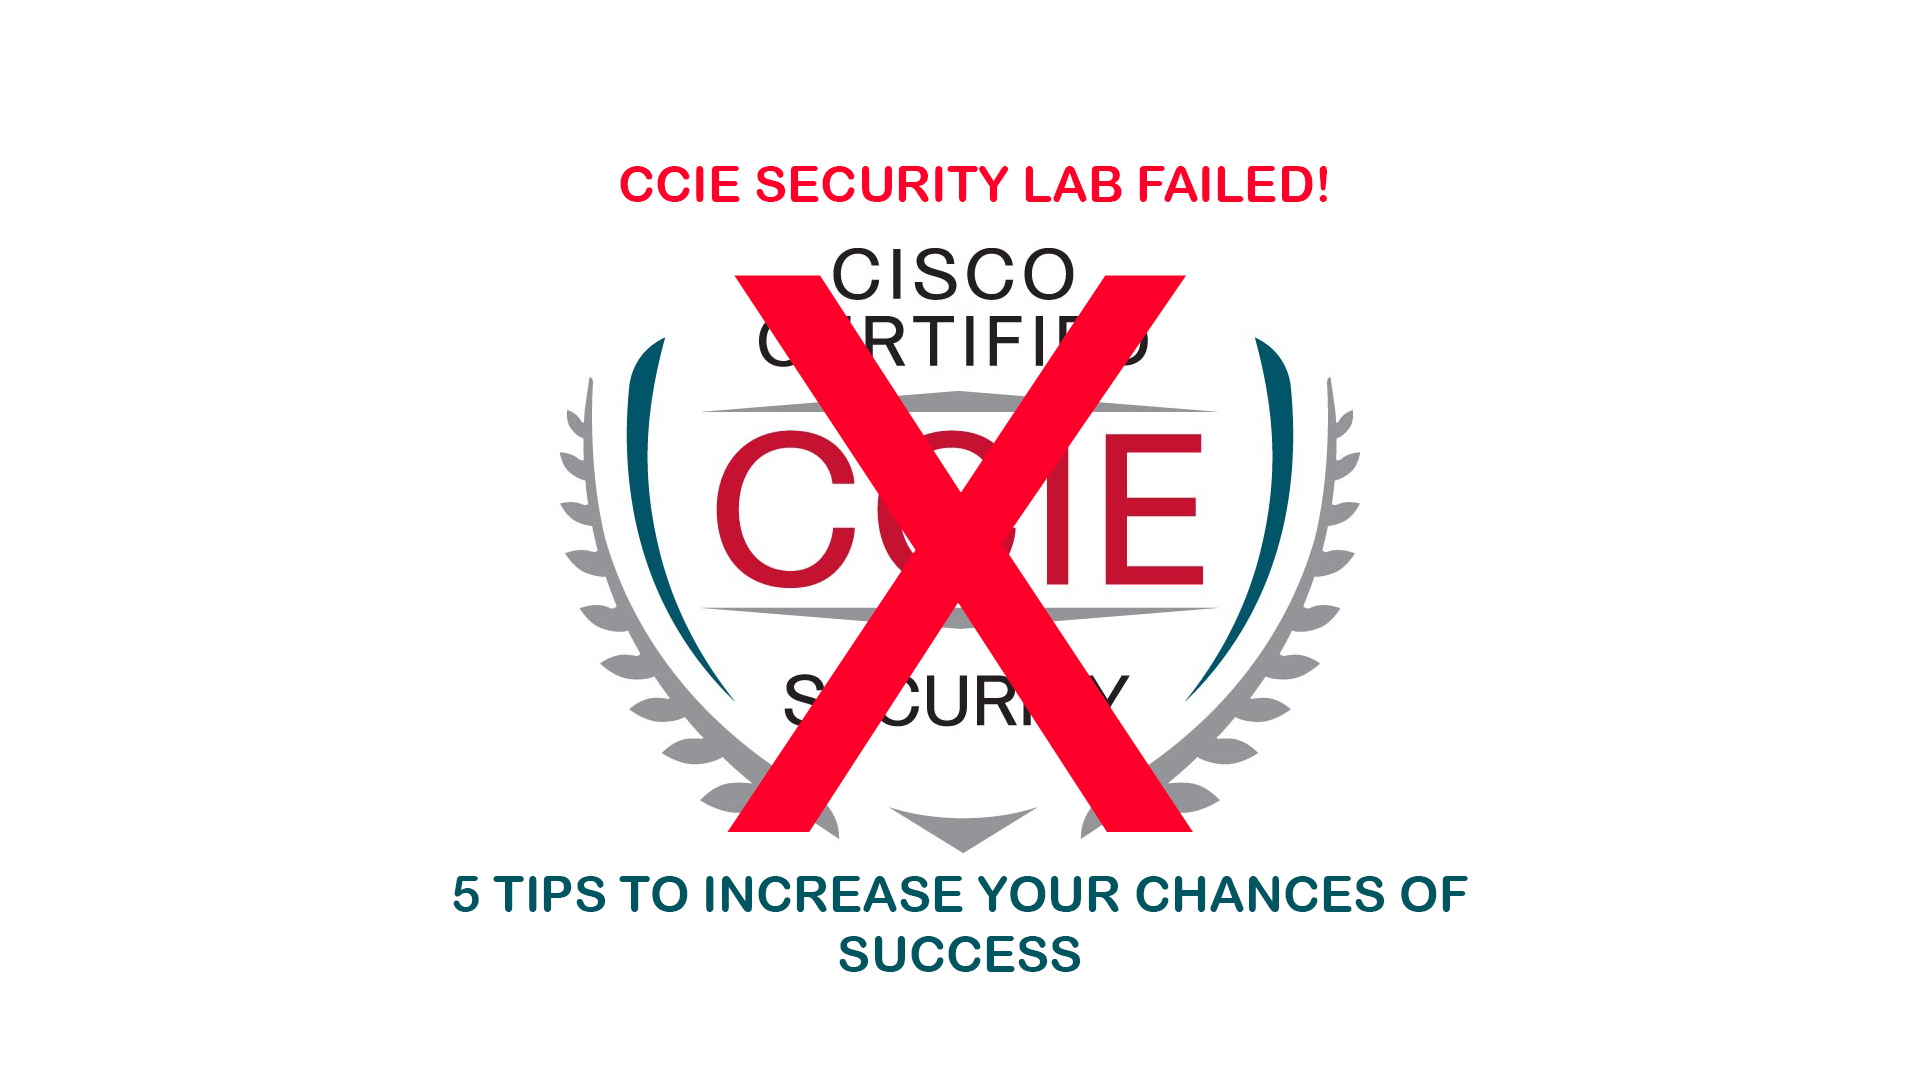 Video: I Failed my CCIE Security Lab | 5 Tips to Increase Your Chances of Success